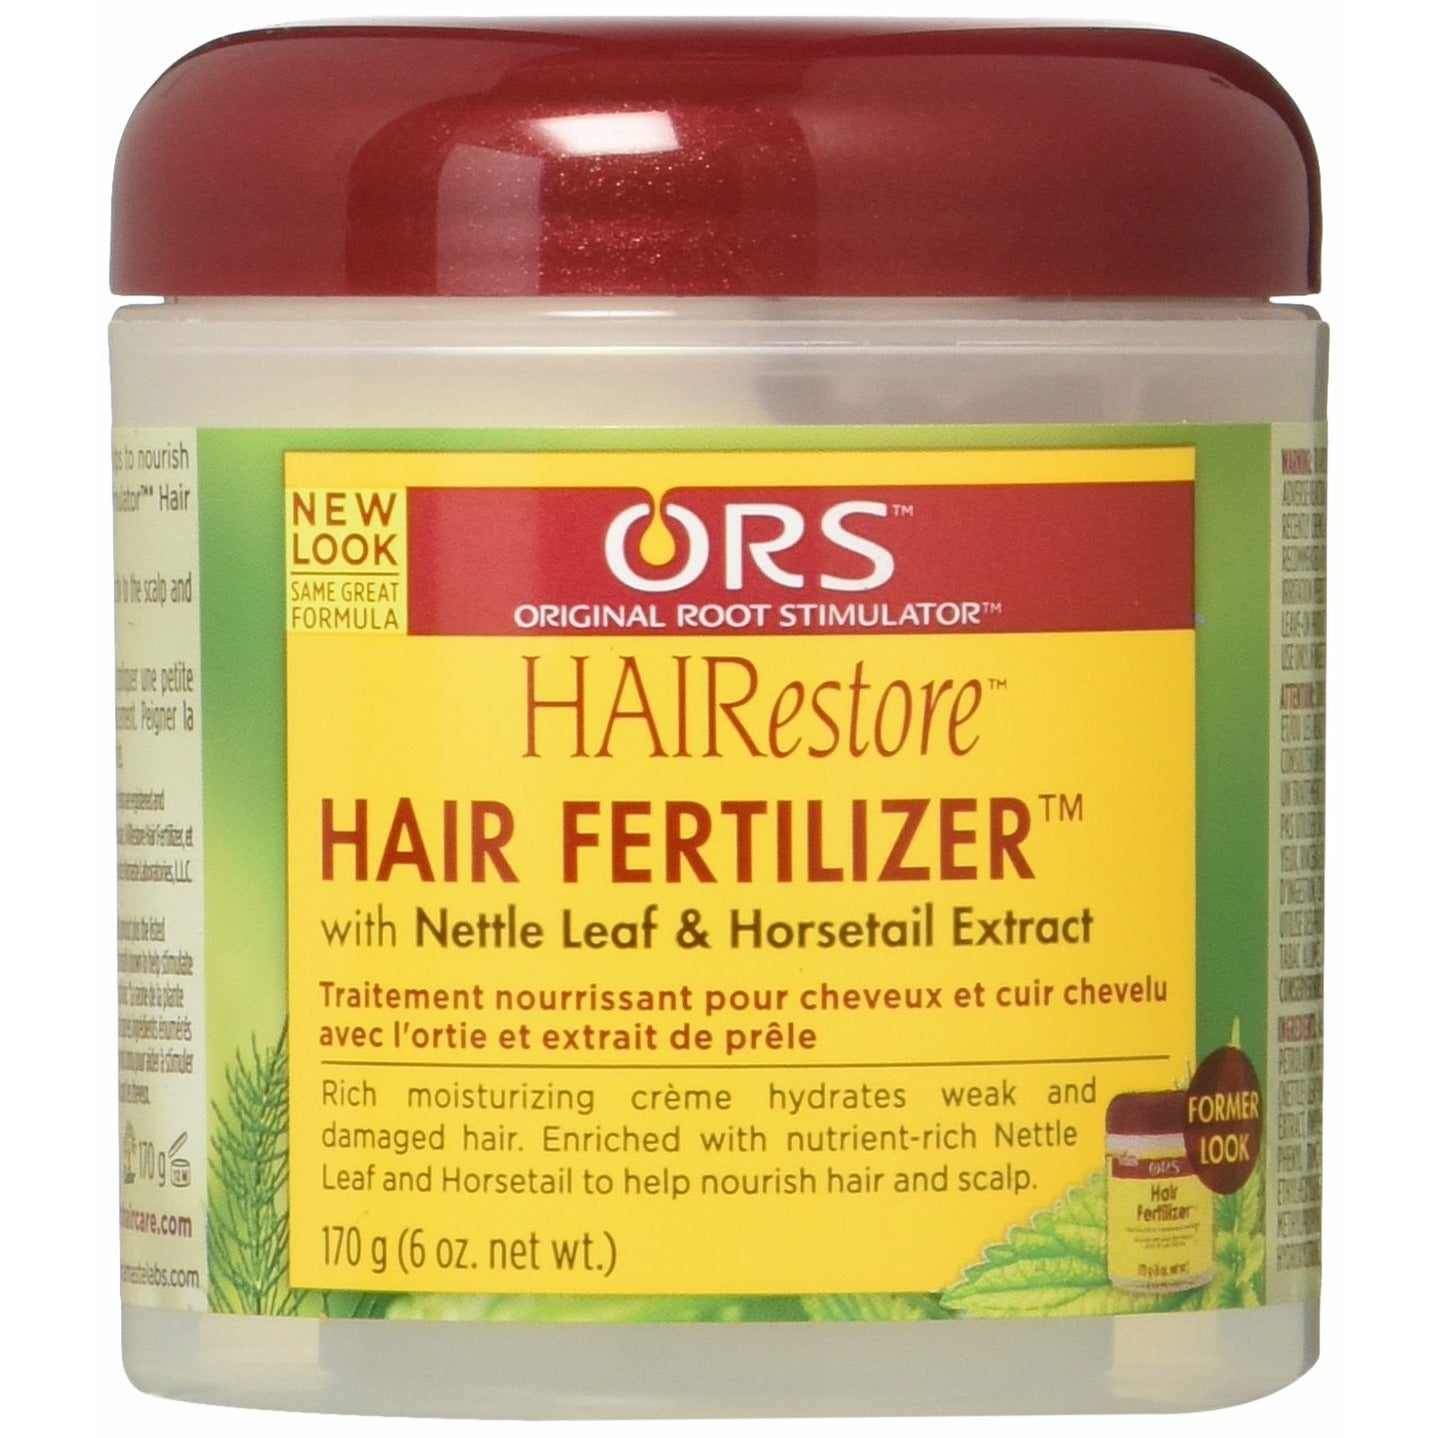 ORS HAIRestore Hair Fertilizer with Nettle Leaf and Horsetail Extract, 6 oz.